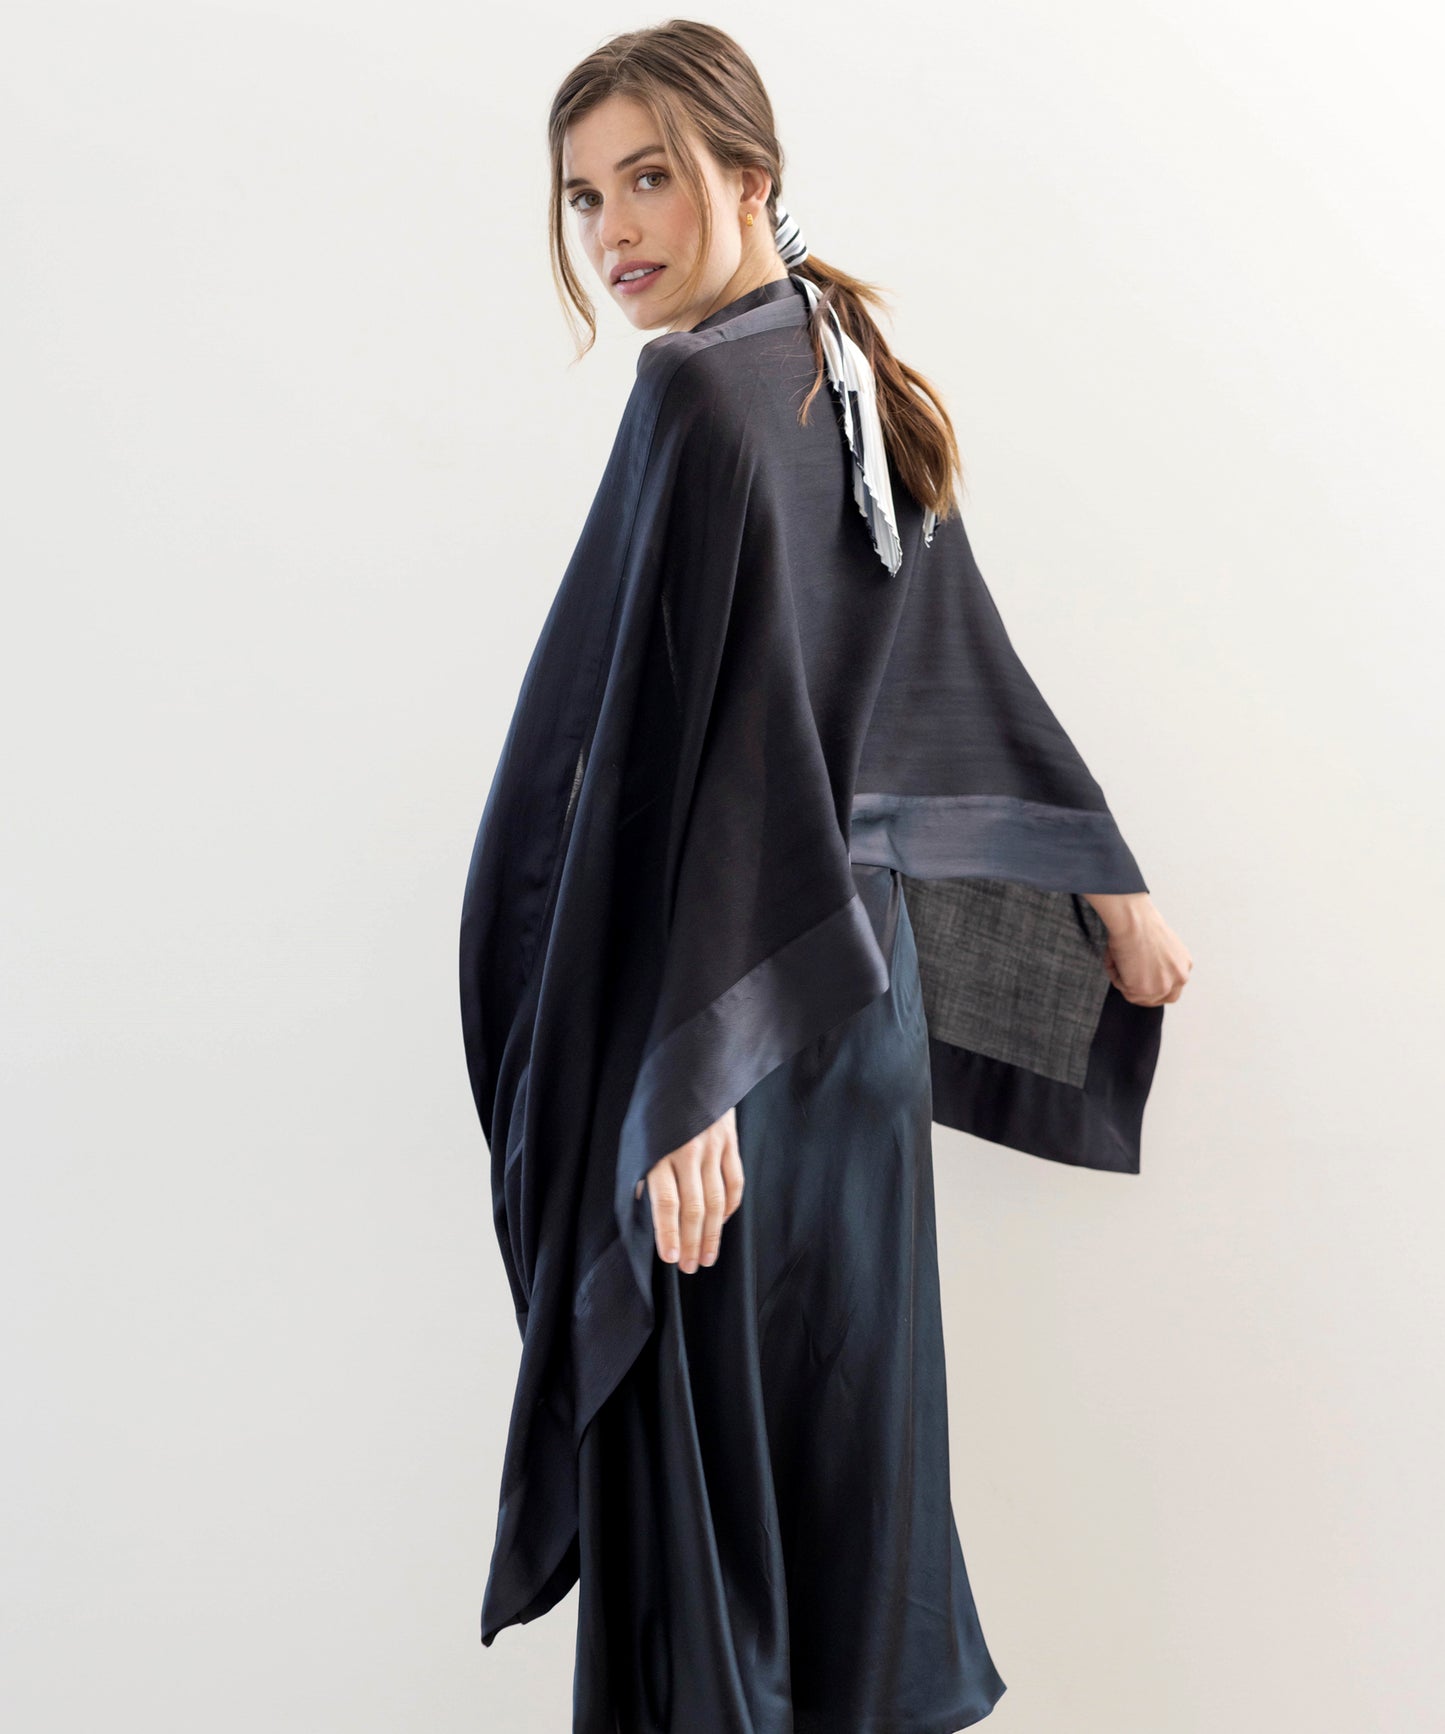 Soiree Wrap in color Black on a model